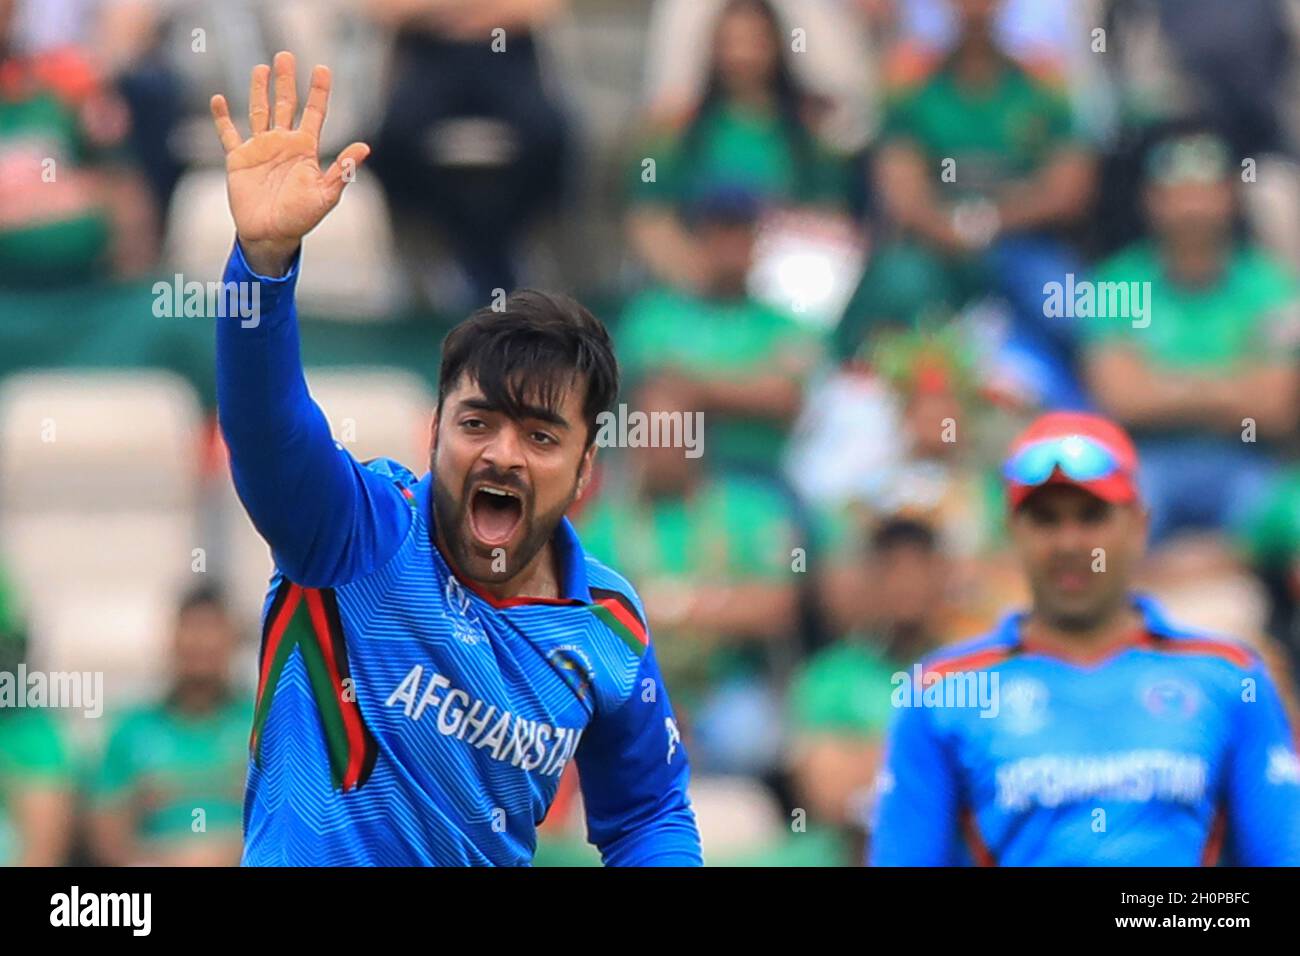 Afghanistan cricket player Rashid Khan in action during the 31st match ICC  (International Cricket Council) Cricket World Cup 2019 between Bangladesh  and Afghanistan at Southampton.(Bangladesh won by 62 runs) (Photo by Md